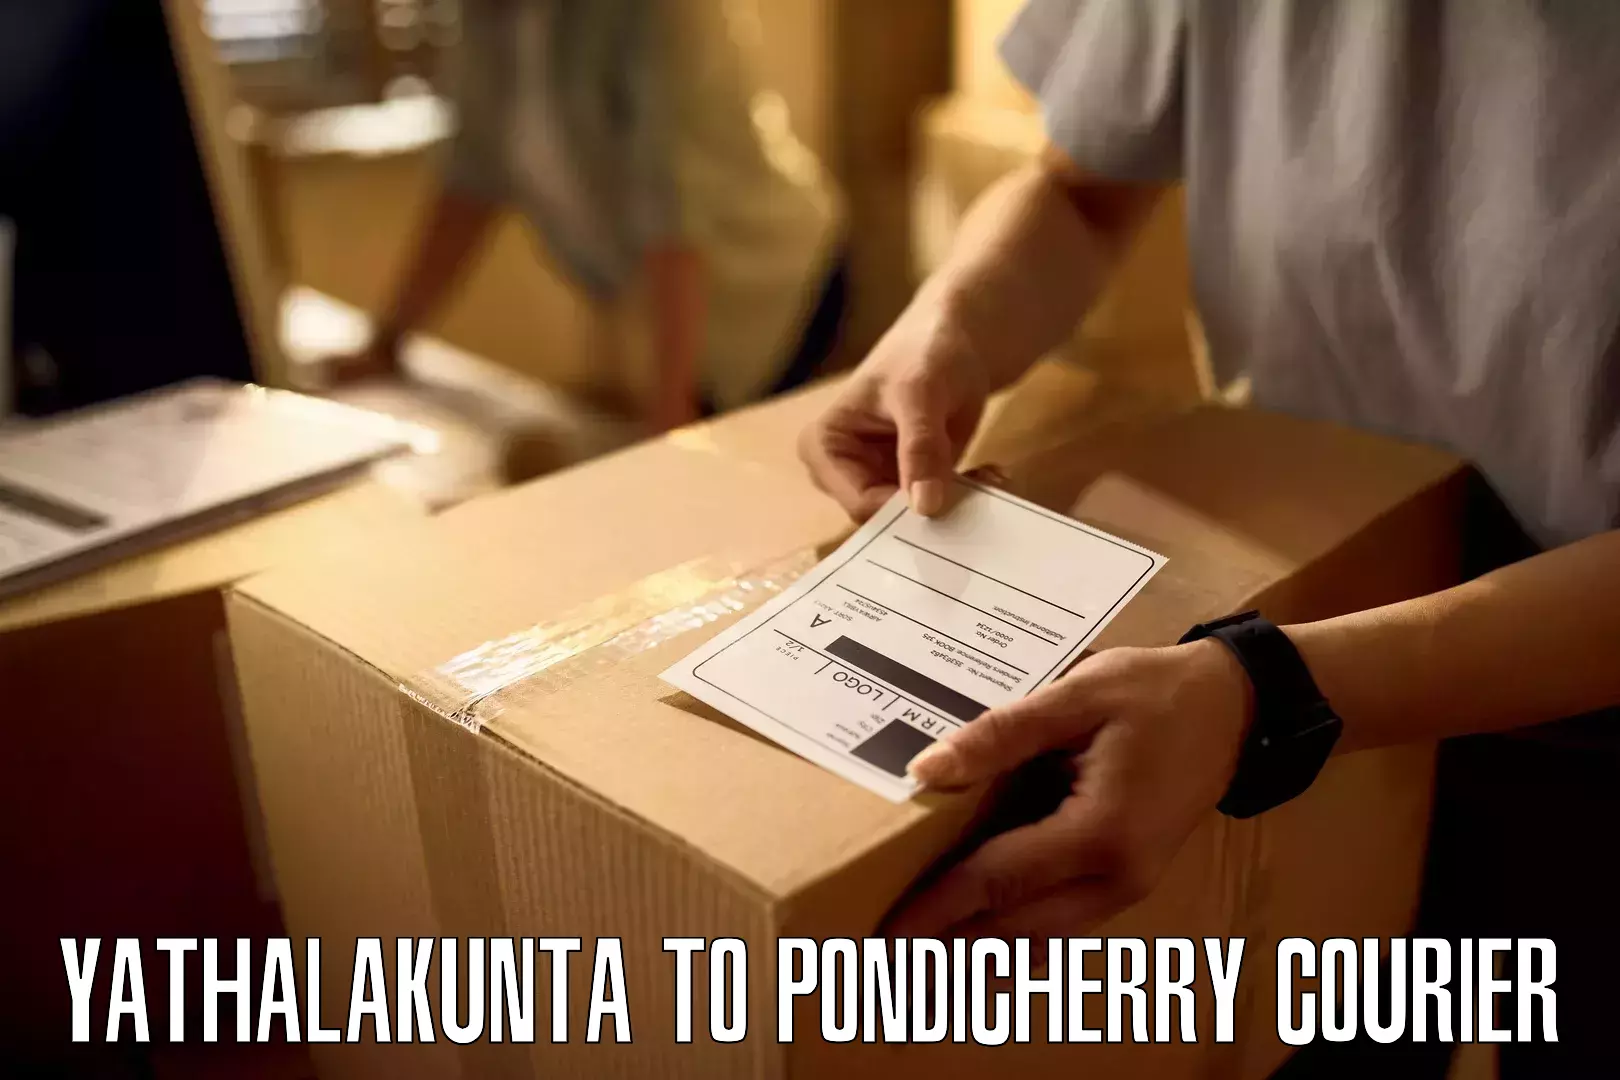 Courier service innovation Yathalakunta to NIT Puducherry